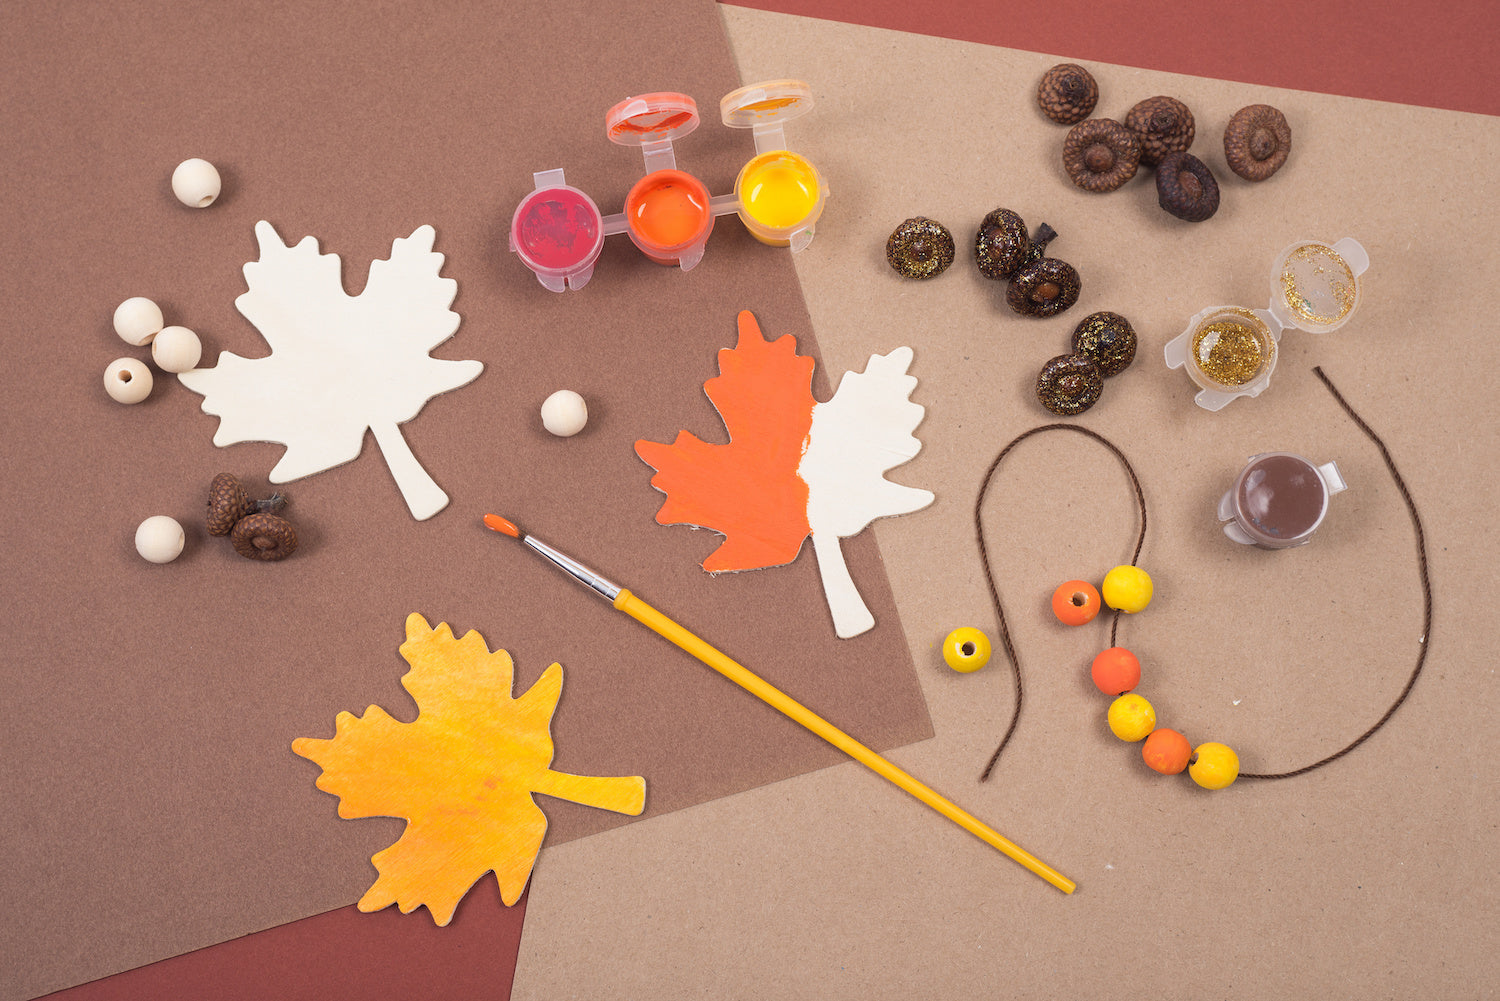 Four More Fall-Themed Art Projects for Your Child With Behavioral Issues